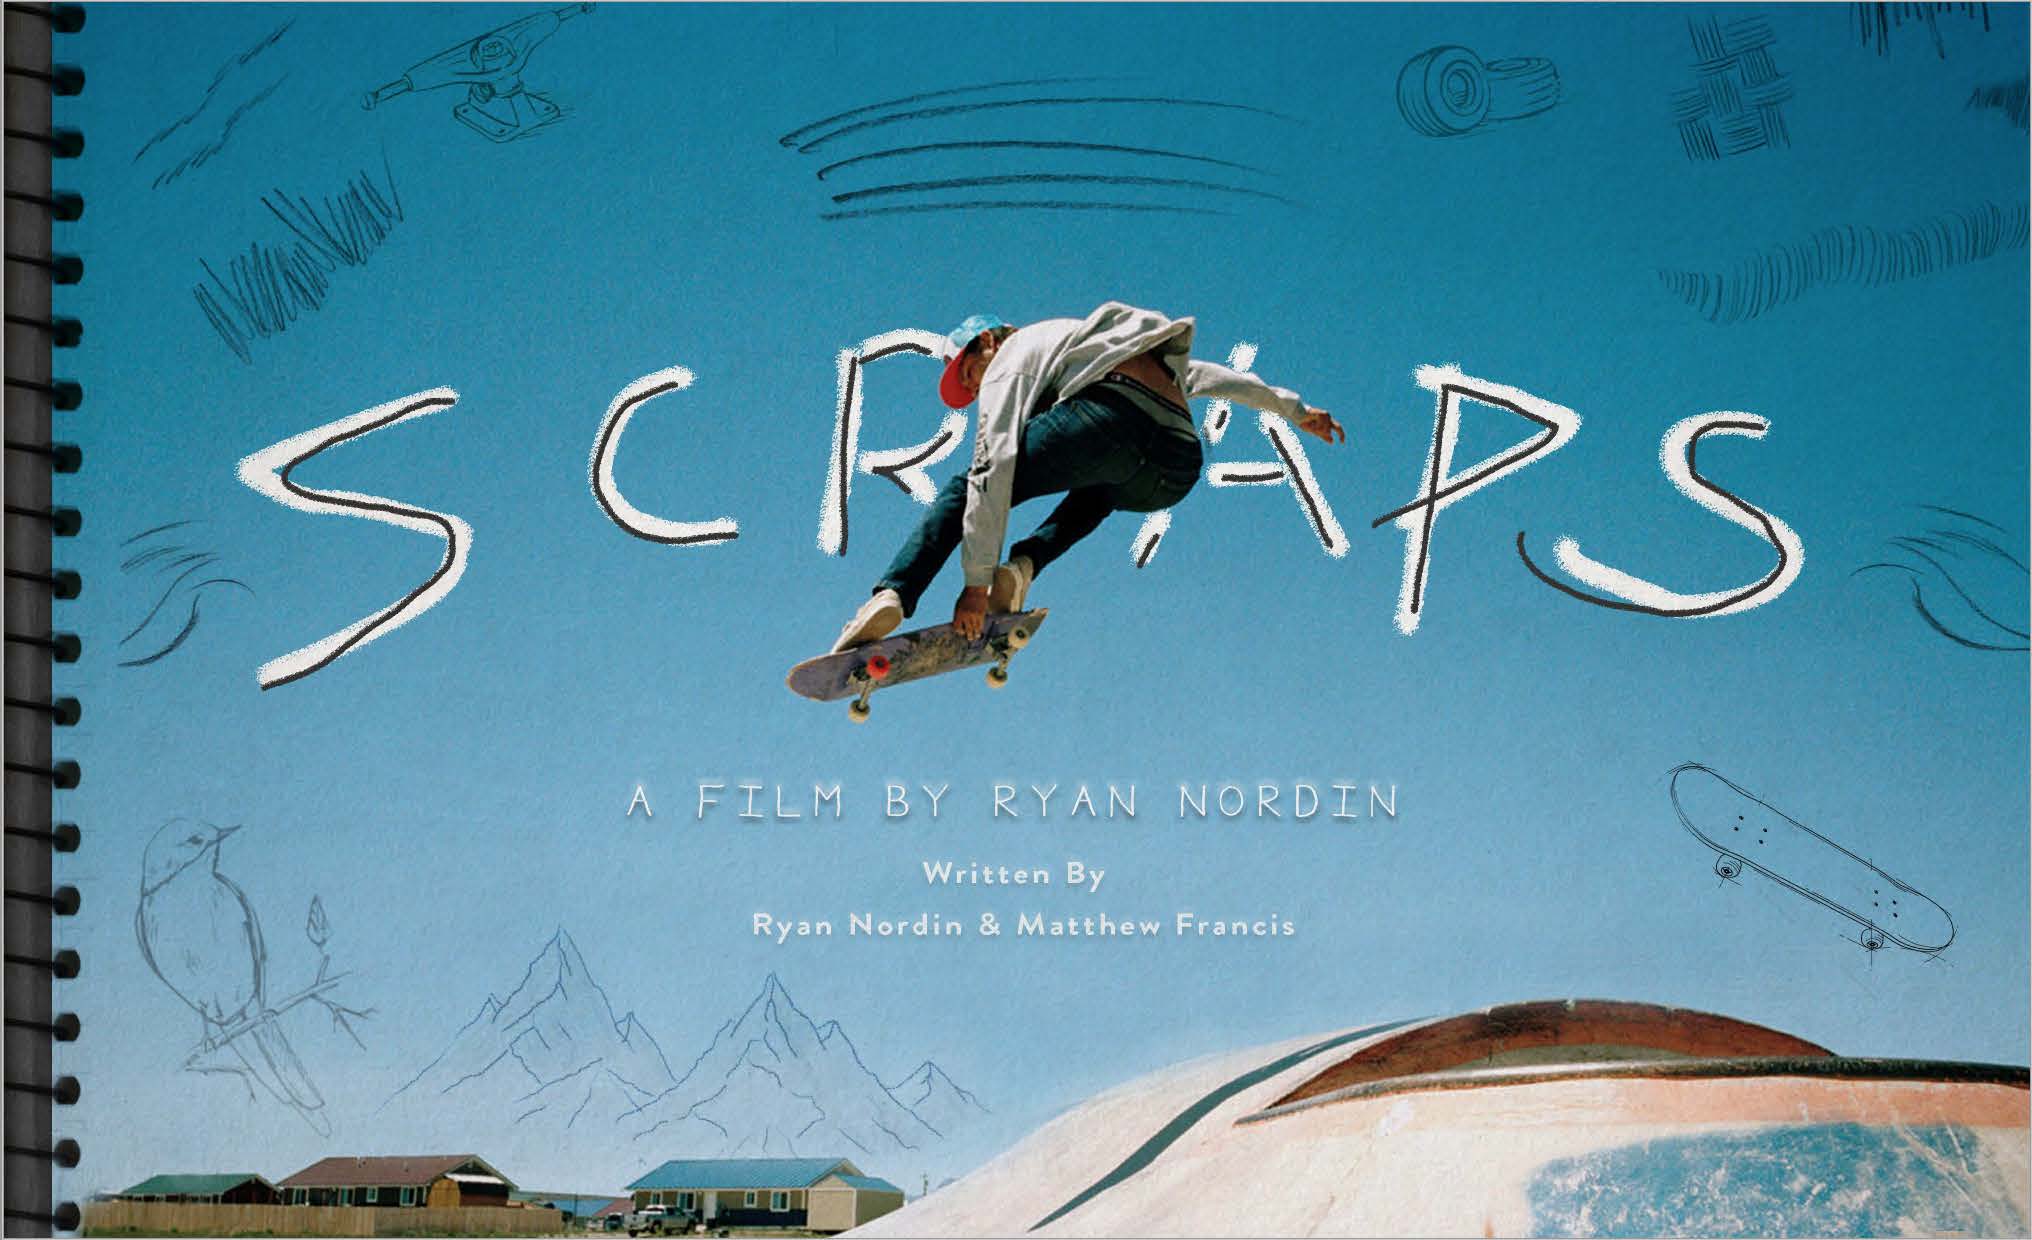 title of movie SCRAPS photo of skateboarder